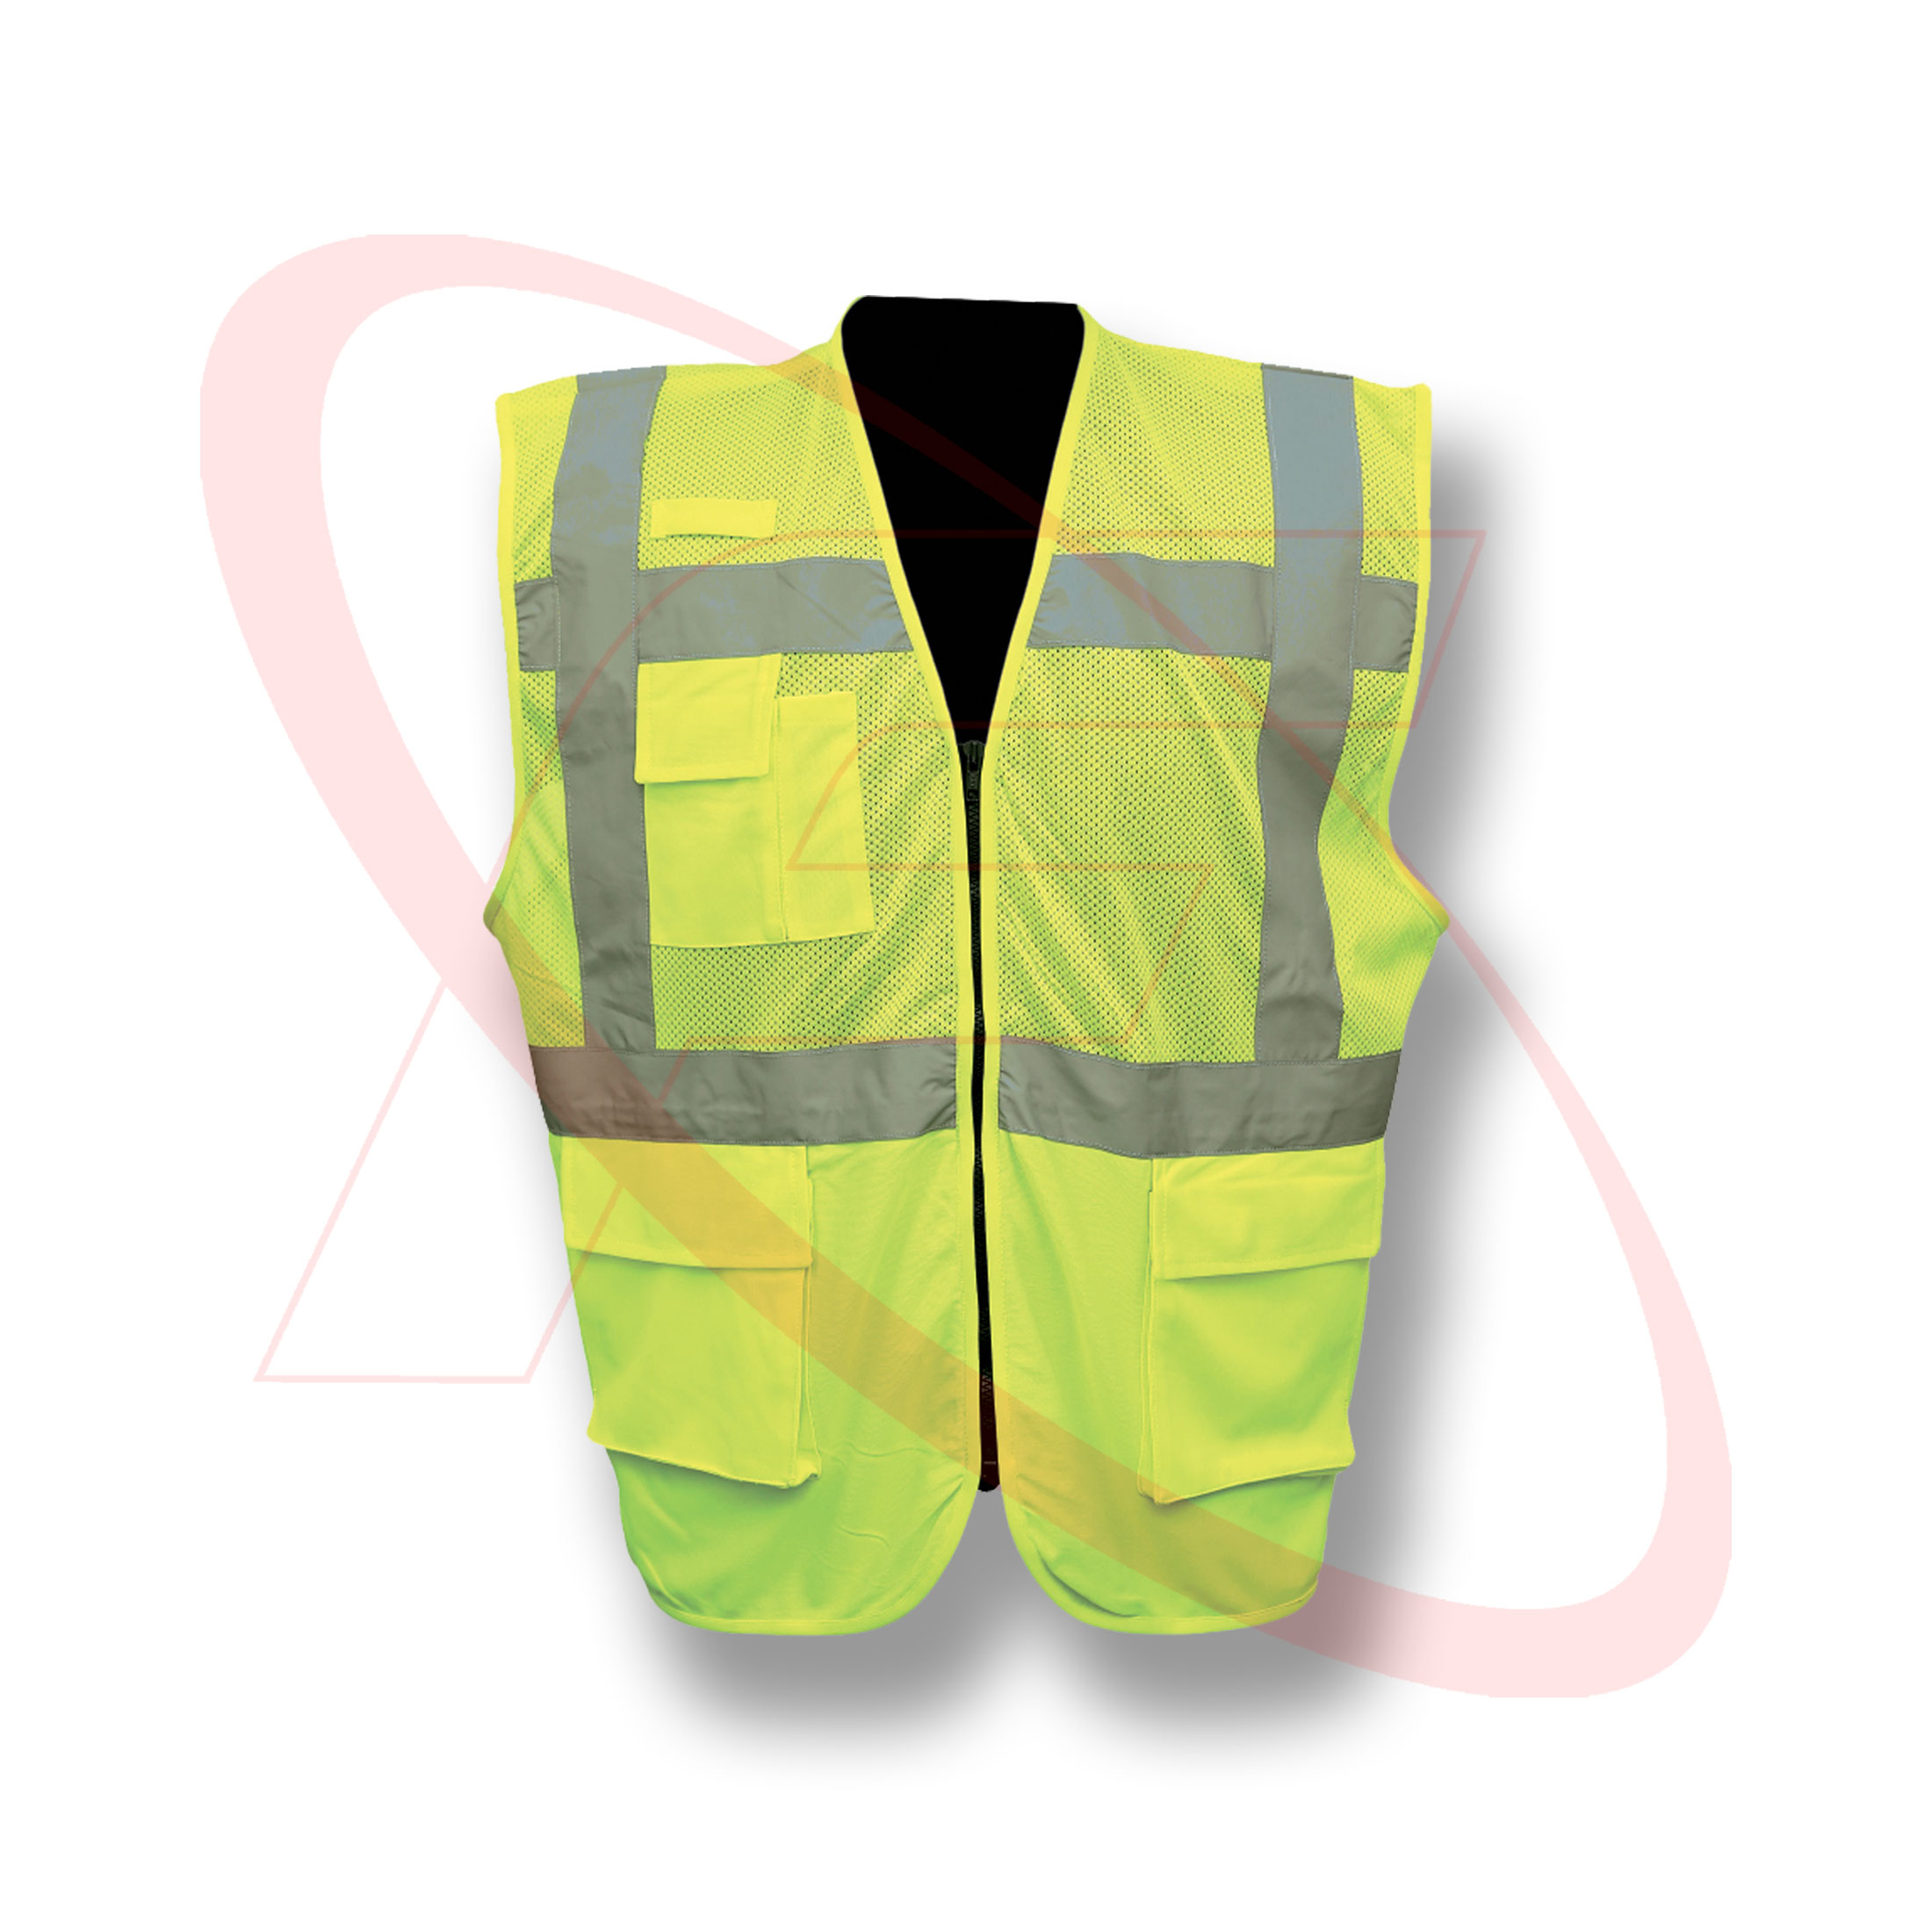 High visibility safety Yellow Vest wholesale safety vest For Worker